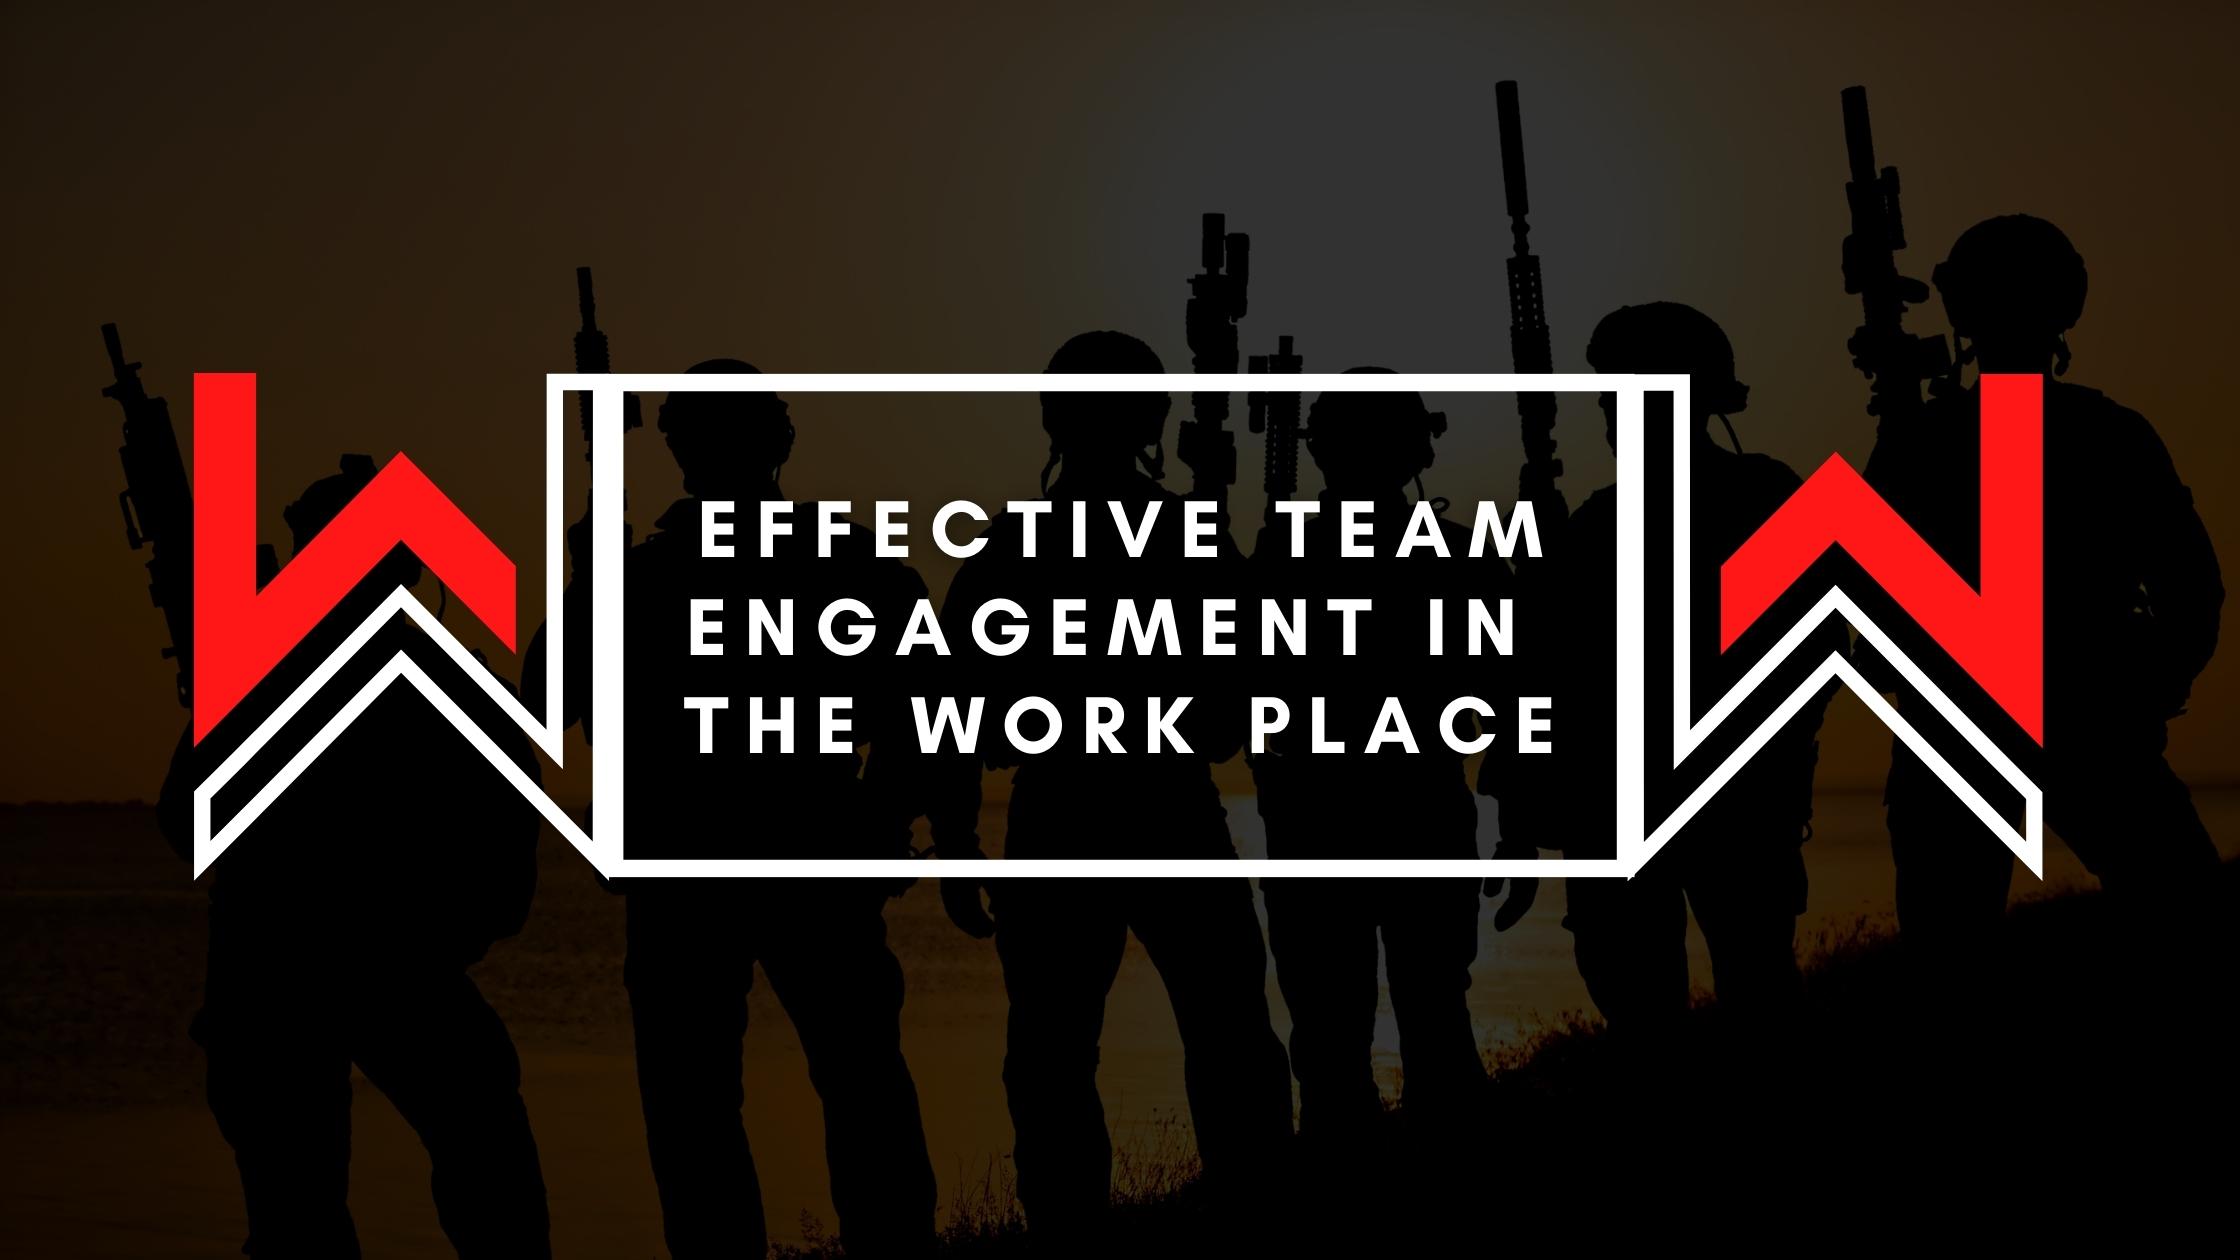 Effective team engagement in the workplace - Warrior Wealth - Chris Jackson